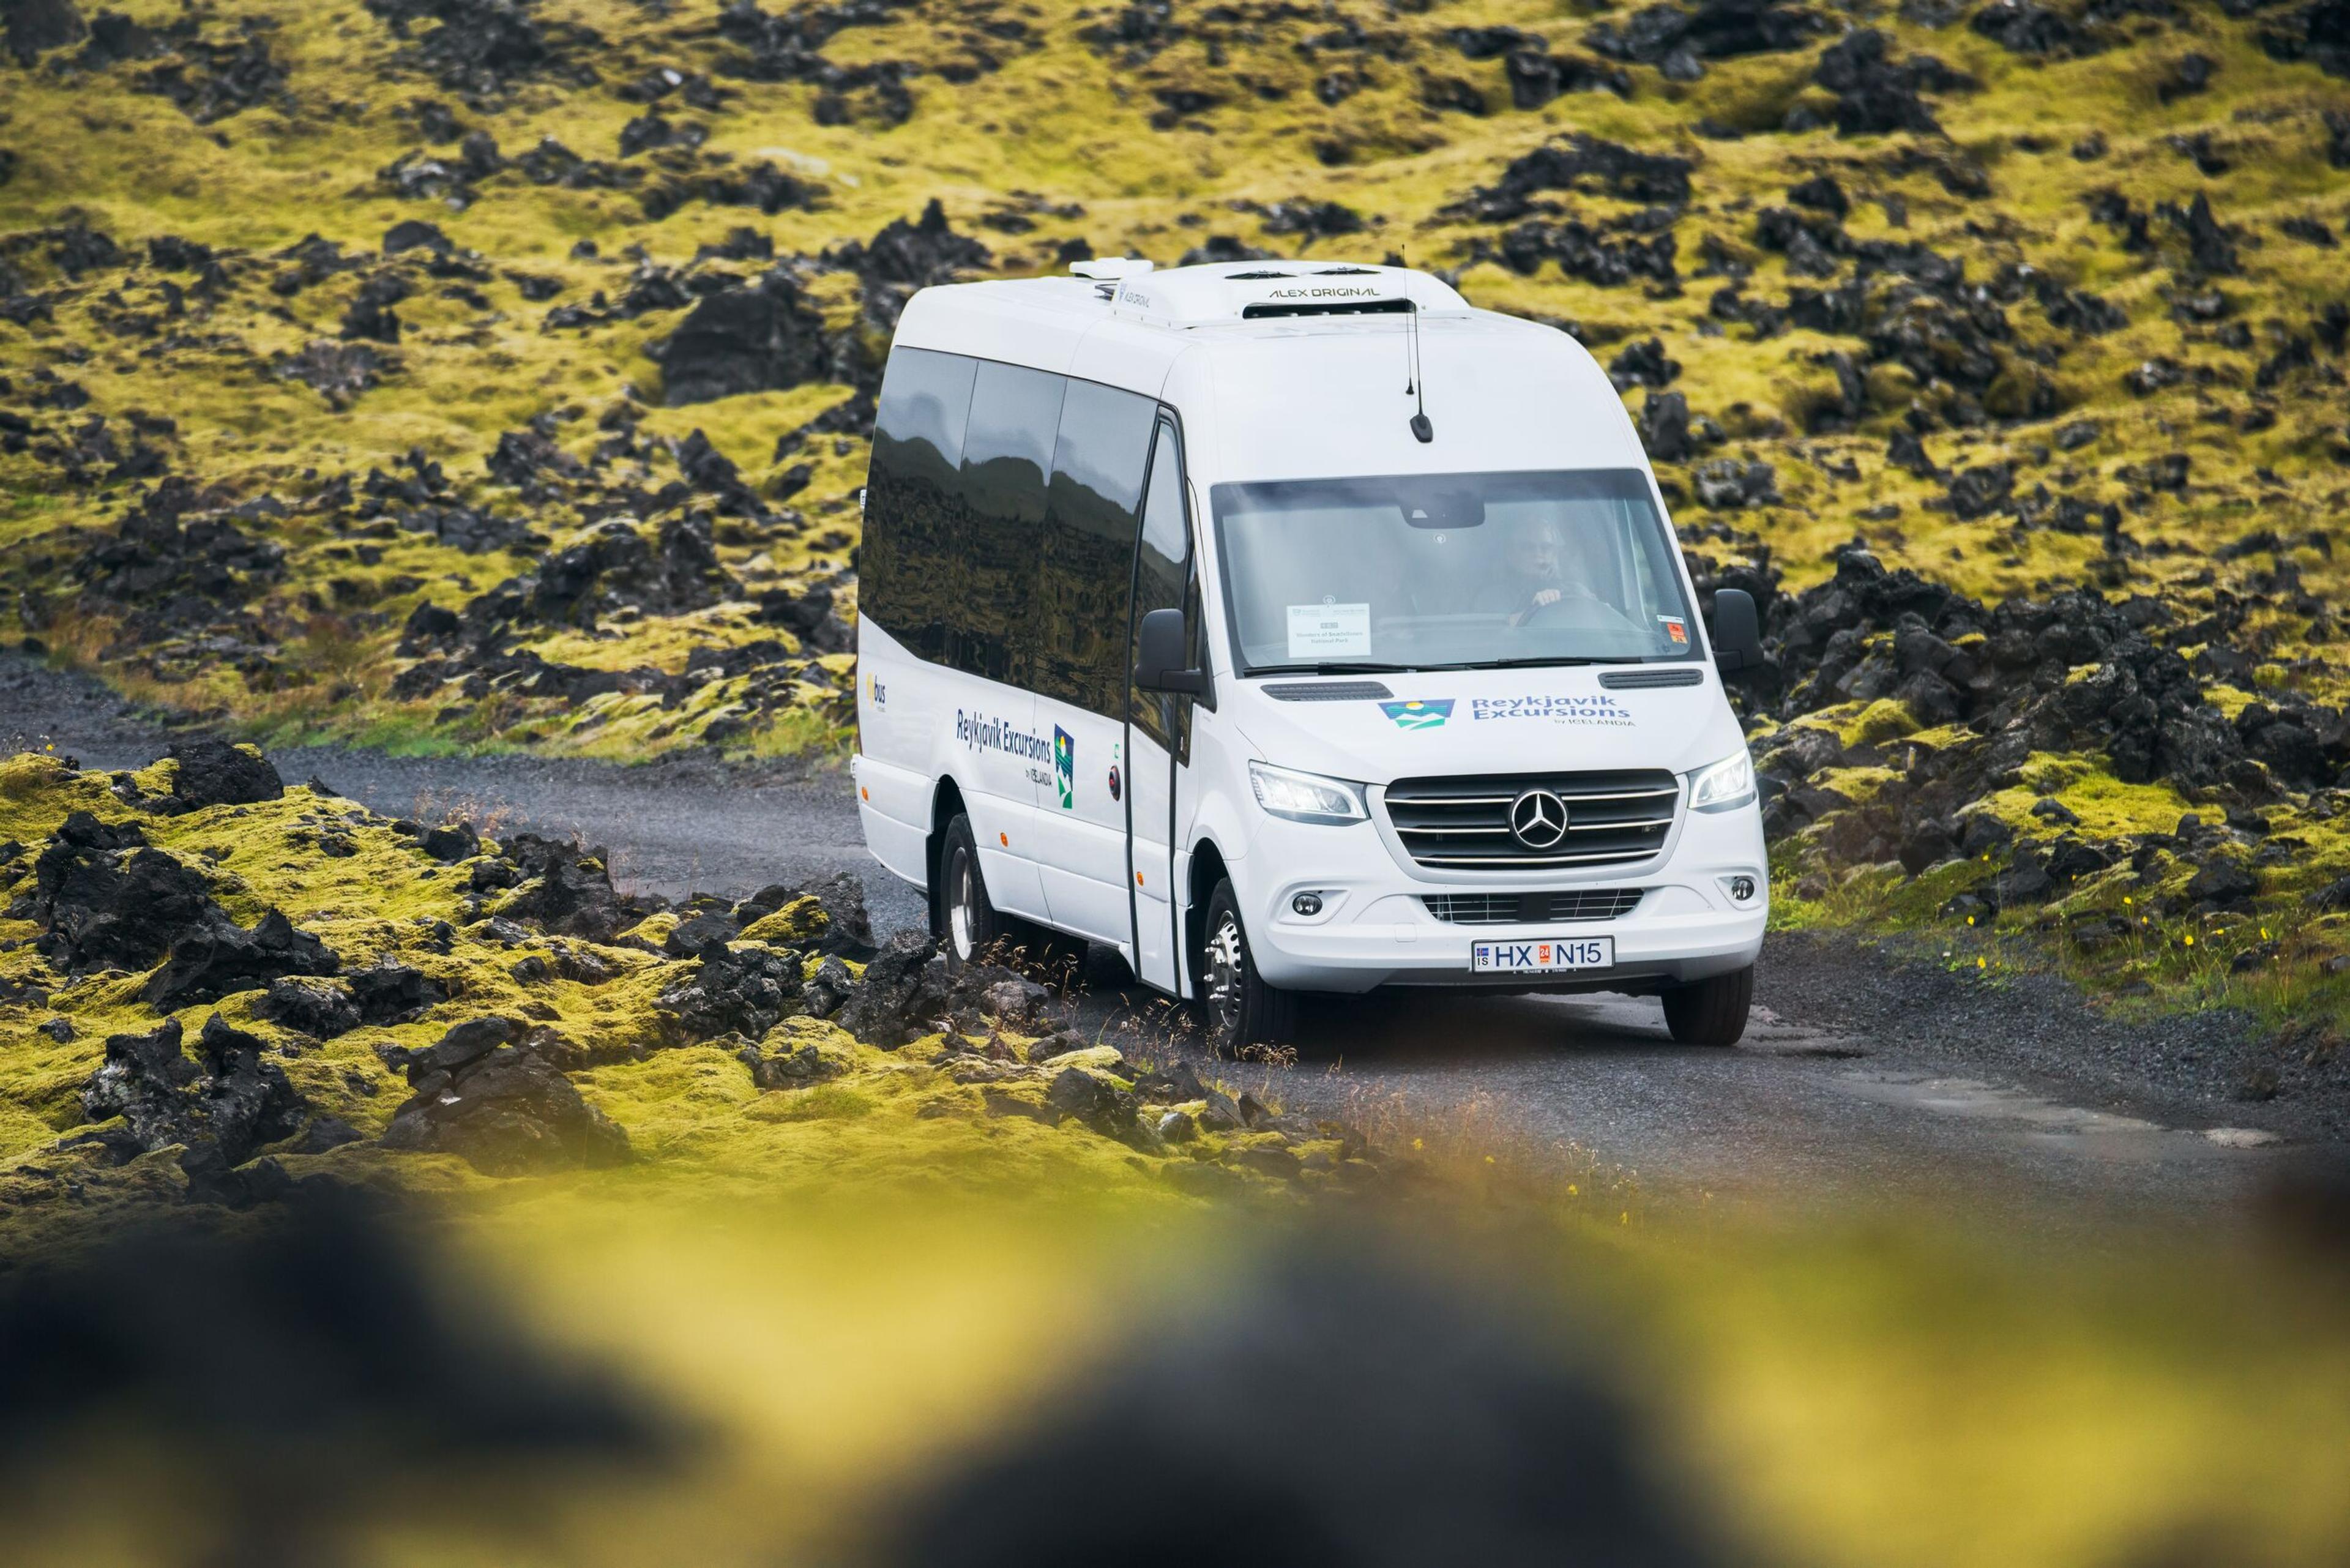 A white, eco-friendly tour bus marked with "Icelandia" branding navigates a winding road amid the stark and beautiful Icelandic landscape, characterized by moss-covered lava fields, underlining the commitment to carbon-neutral tours in Iceland.